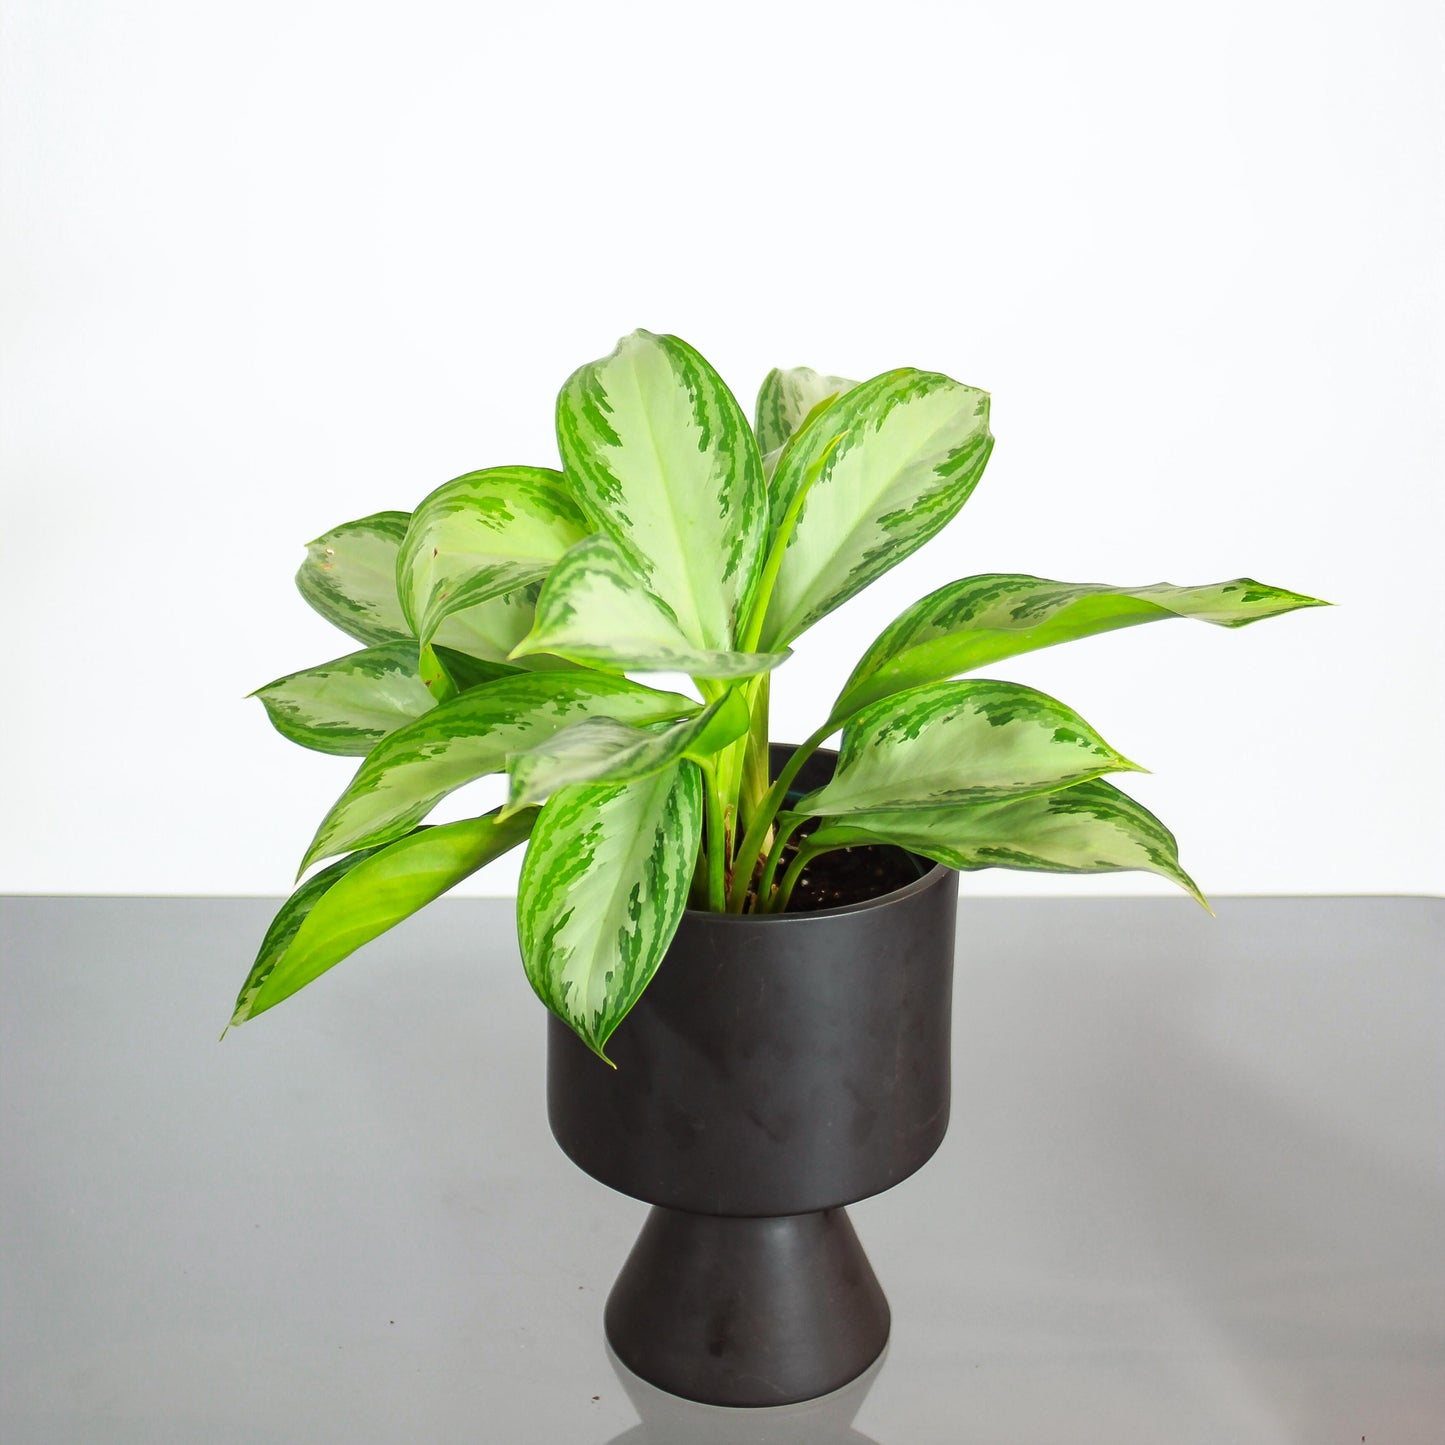 Chinese Evergreen (Aglaonema 'Silver Bay') in a 6 inch pot. Indoor plant for sale by Promise Supply for delivery and pickup in Toronto